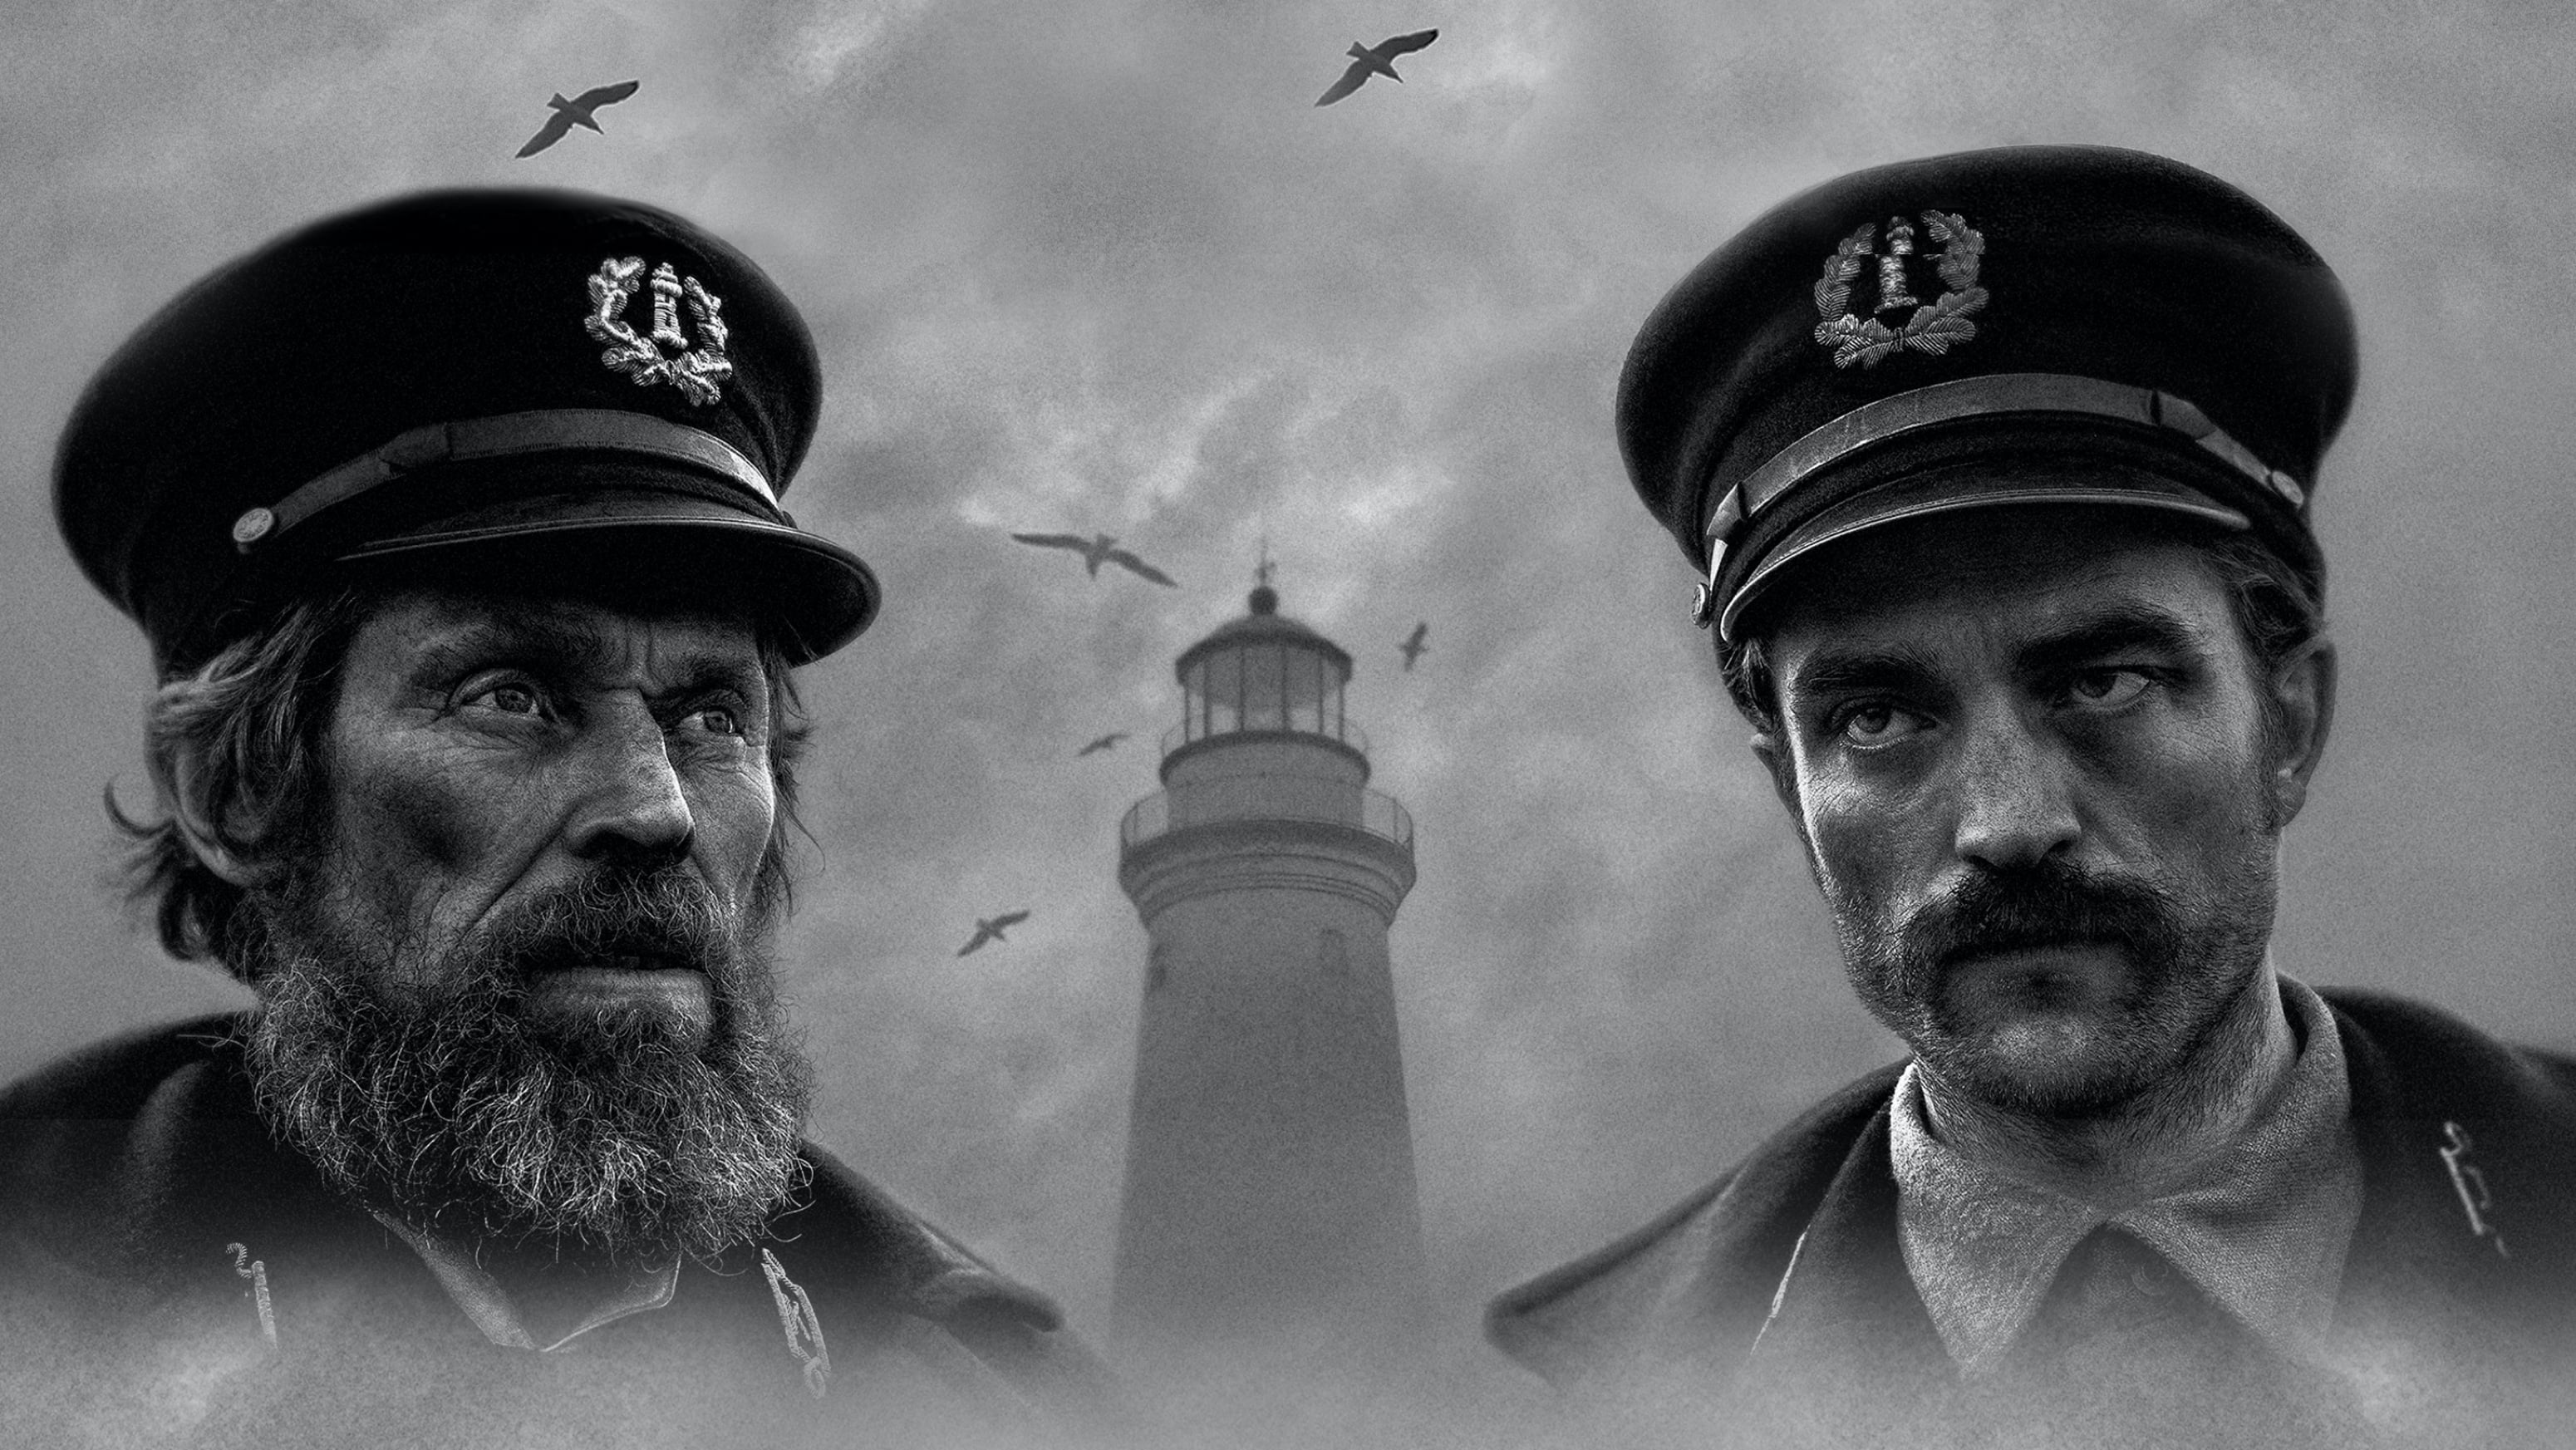 Movie The Lighthouse HD Wallpaper | Background Image